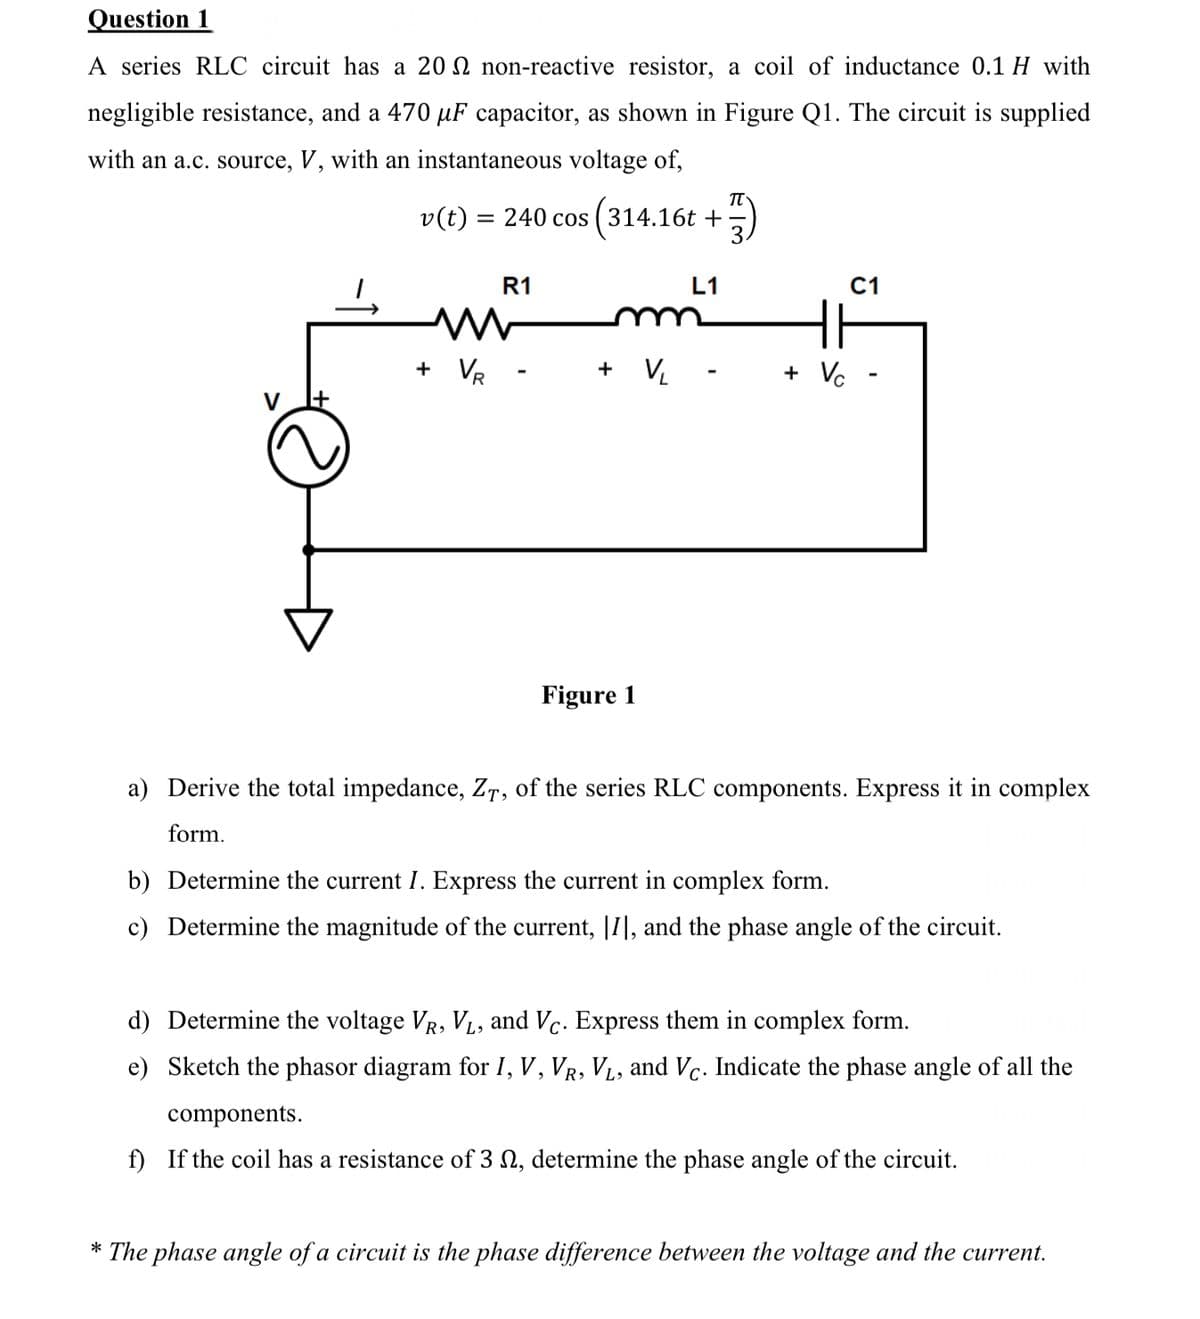 Question 1
A series RLC circuit has a 20 non-reactive resistor, a coil of inductance 0.1 H with
negligible resistance, and a 470 µF capacitor, as shown in Figure Q1. The circuit is supplied
with an a.c. source, V, with an instantaneous voltage of,
v(t) = 240 cos (314.16t +
R1
L1
C1
+ VR
+ V₁
+ Vc
V
Figure 1
a) Derive the total impedance, ZT, of the series RLC components. Express it in complex
form.
b) Determine the current I. Express the current in complex form.
c) Determine the magnitude of the current, [I], and the phase angle of the circuit.
d) Determine the voltage VR, VL, and Vc. Express them in complex form.
e) Sketch the phasor diagram for I, V, VR, VL, and Vc. Indicate the phase angle of all the
components.
f) If the coil has a resistance of 3 , determine the phase angle of the circuit.
*The phase angle of a circuit is the phase difference between the voltage and the current.